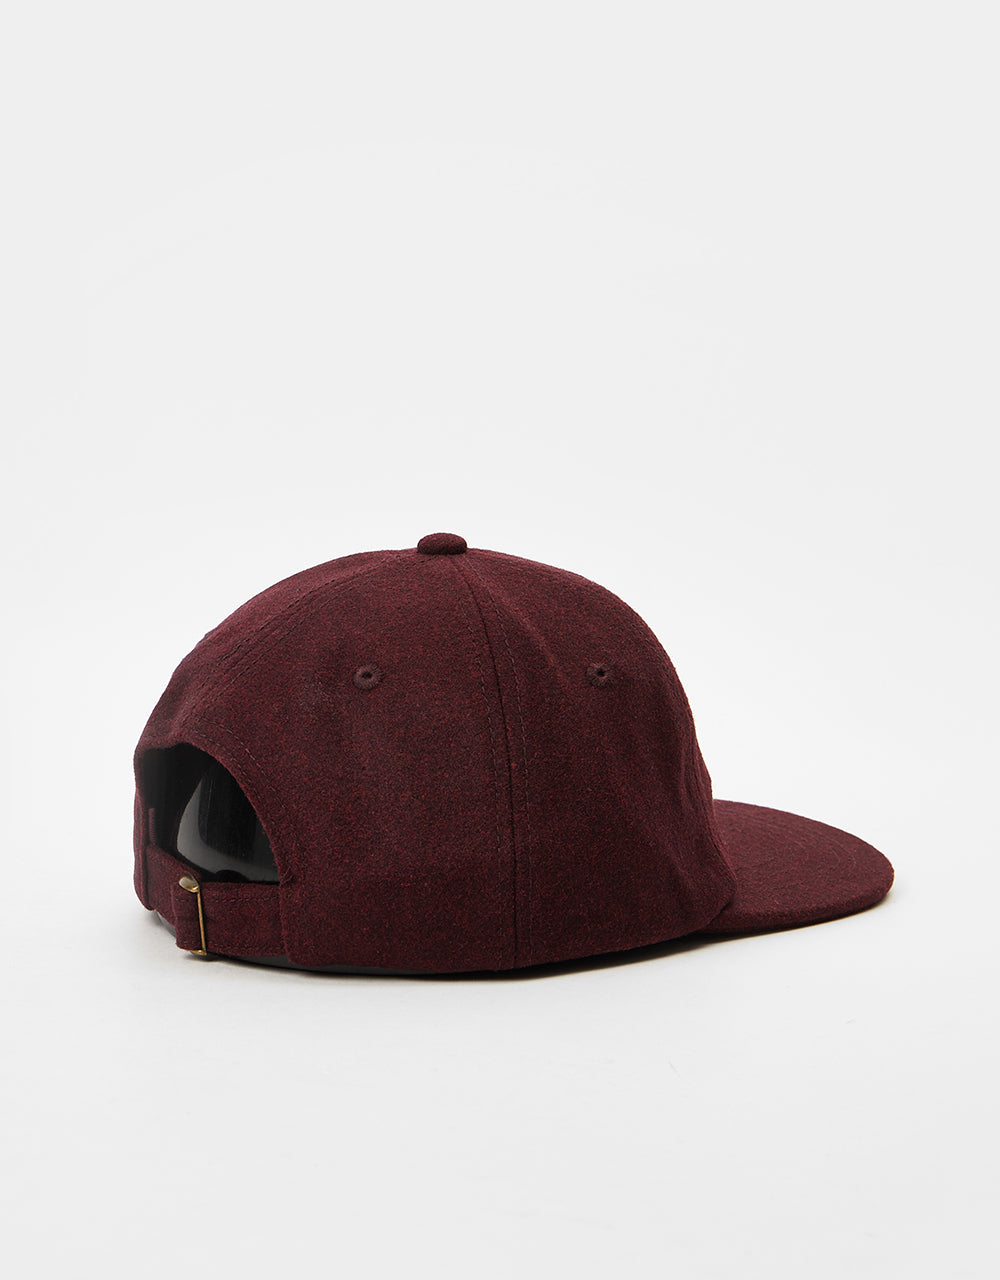 Route One Unstructured Melton Wool Cap - Burgundy